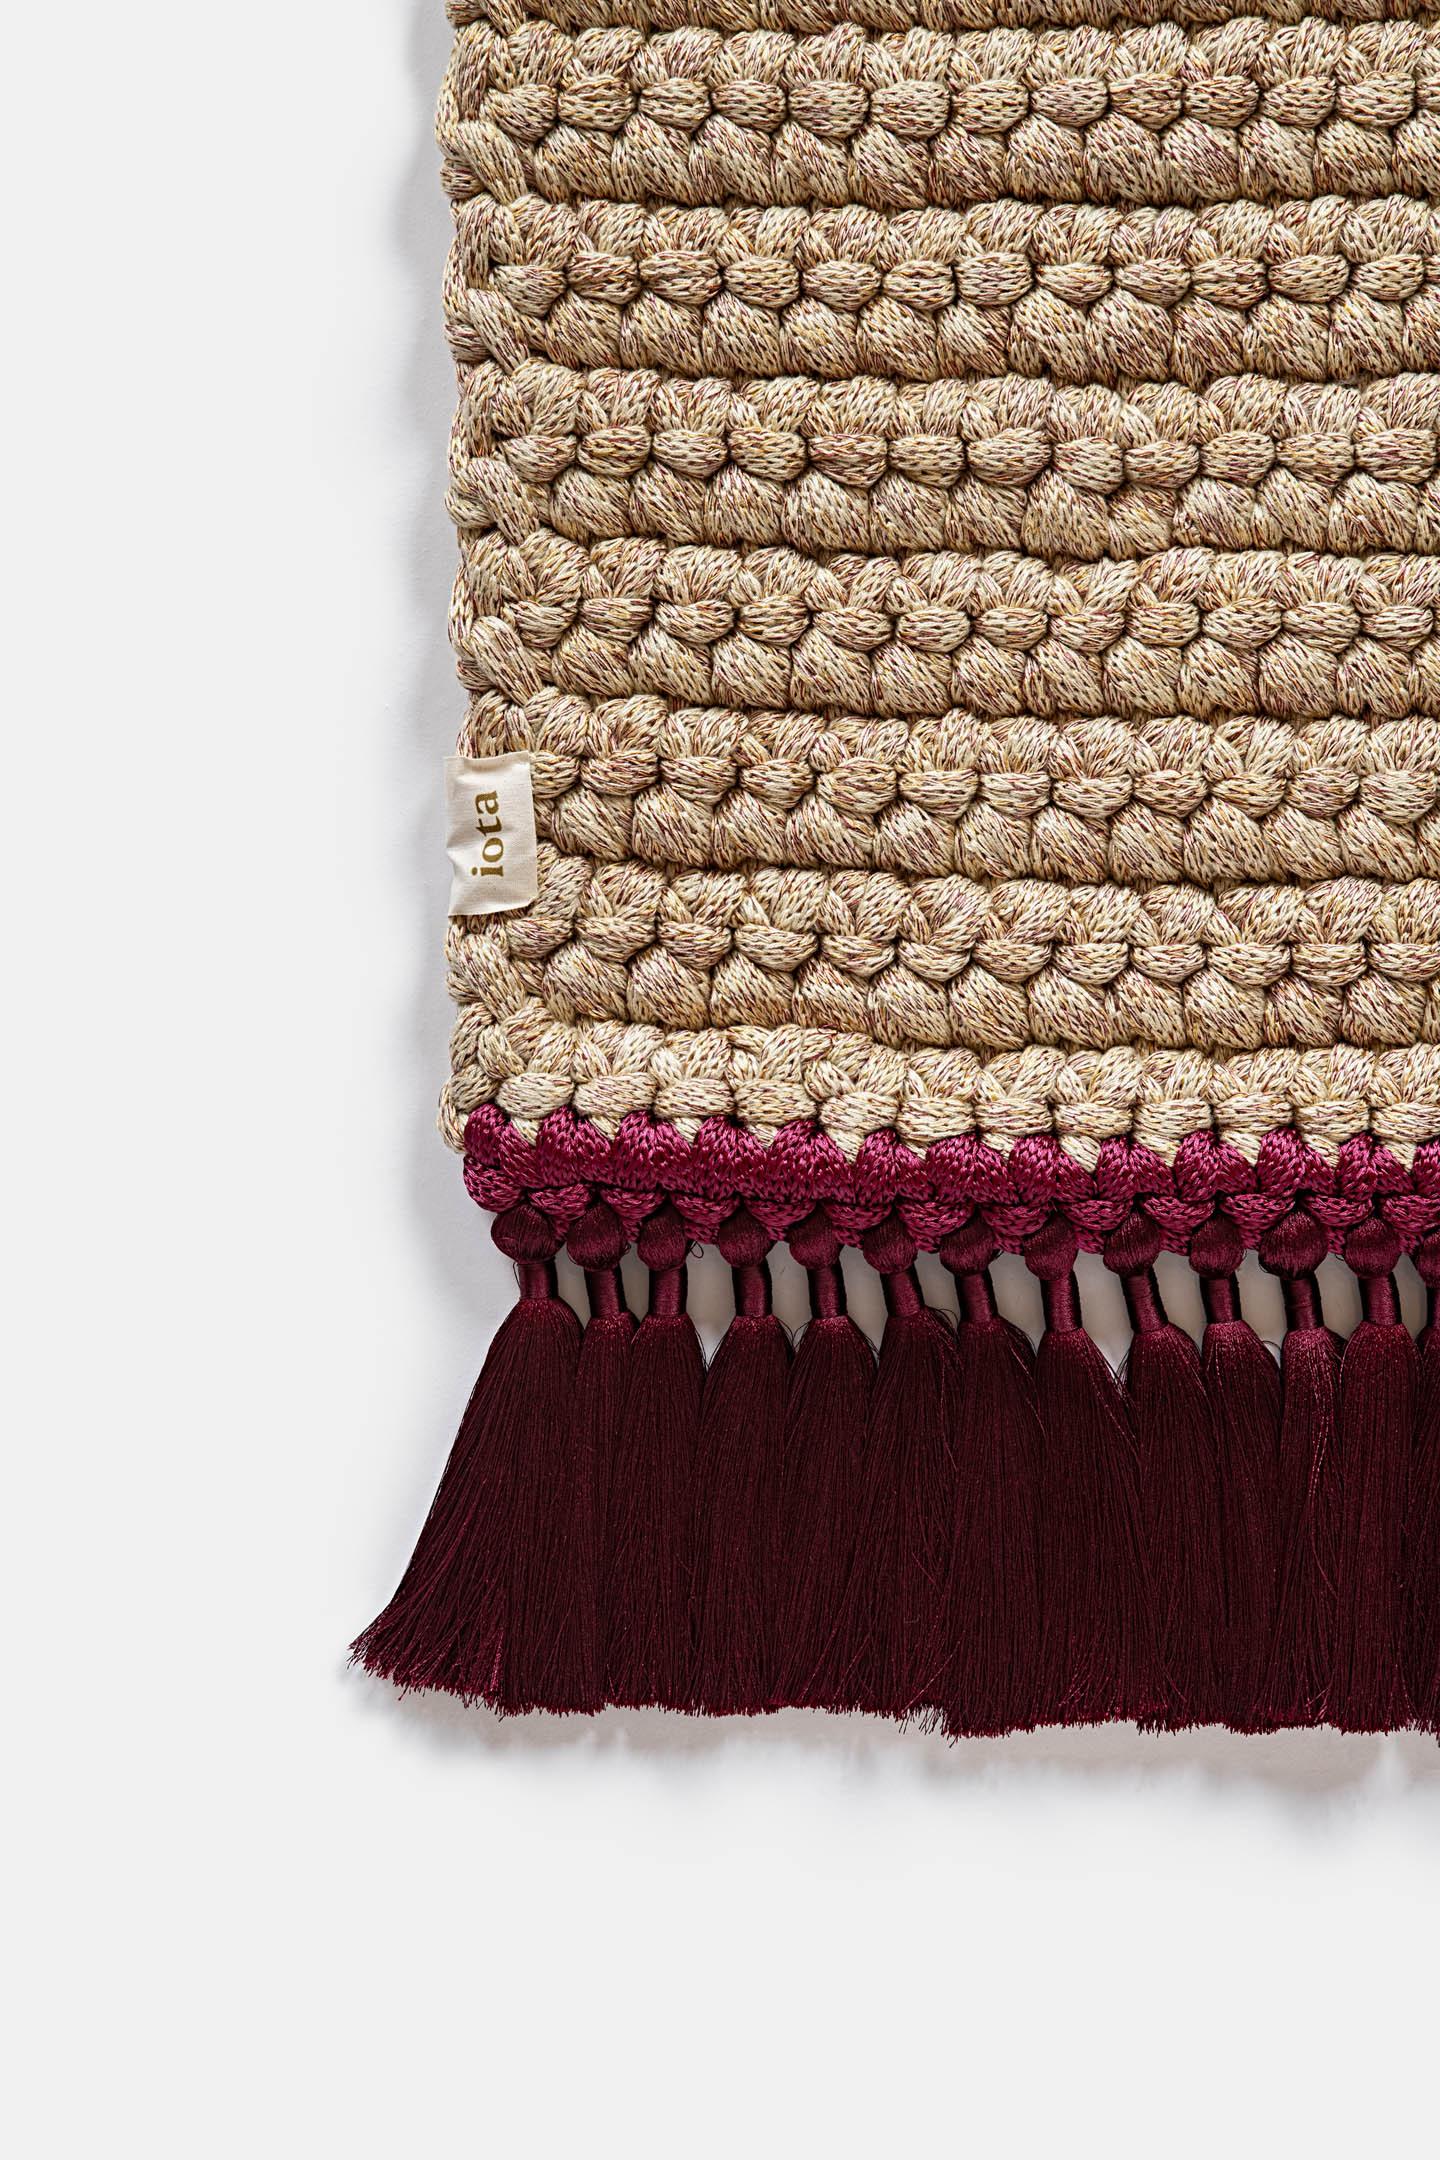 Israeli Handmade Crochet Two-Tone Rug in Beige Brown made of Cotton & Polyester by iota